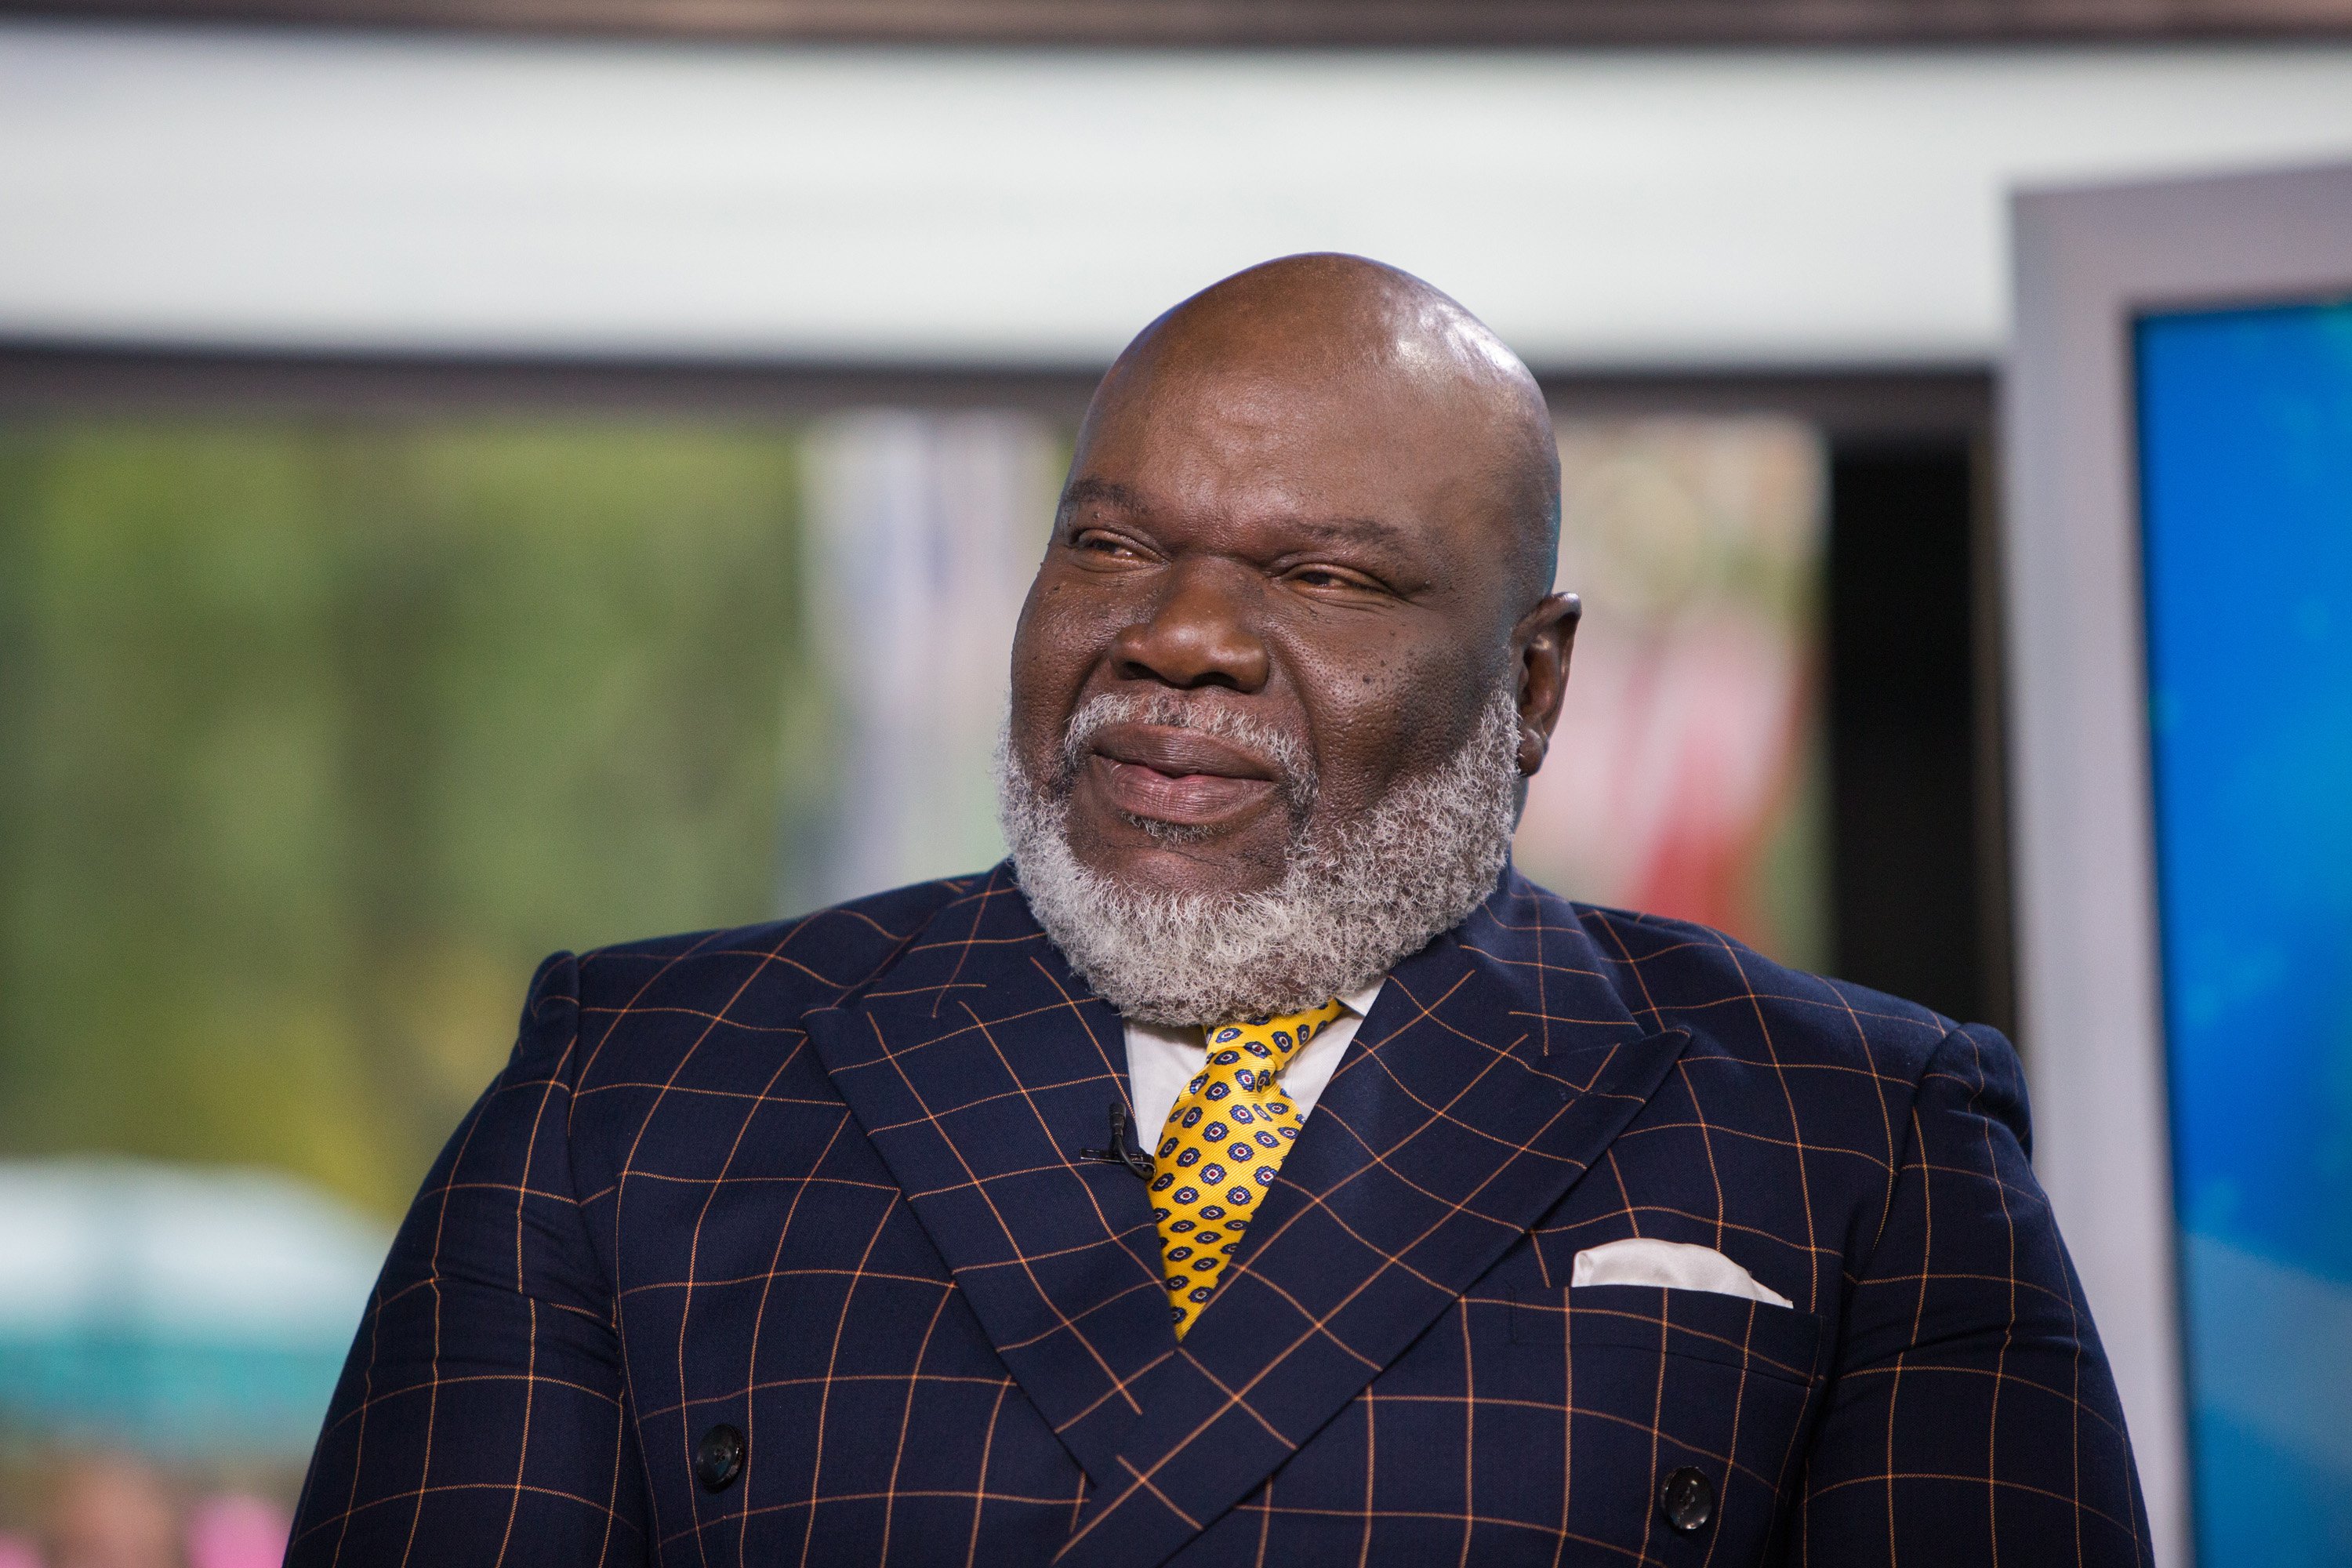 T.D. Jakes pictured on the set of "Today" on Monday, October 9, 2017. | Photo: Getty Images